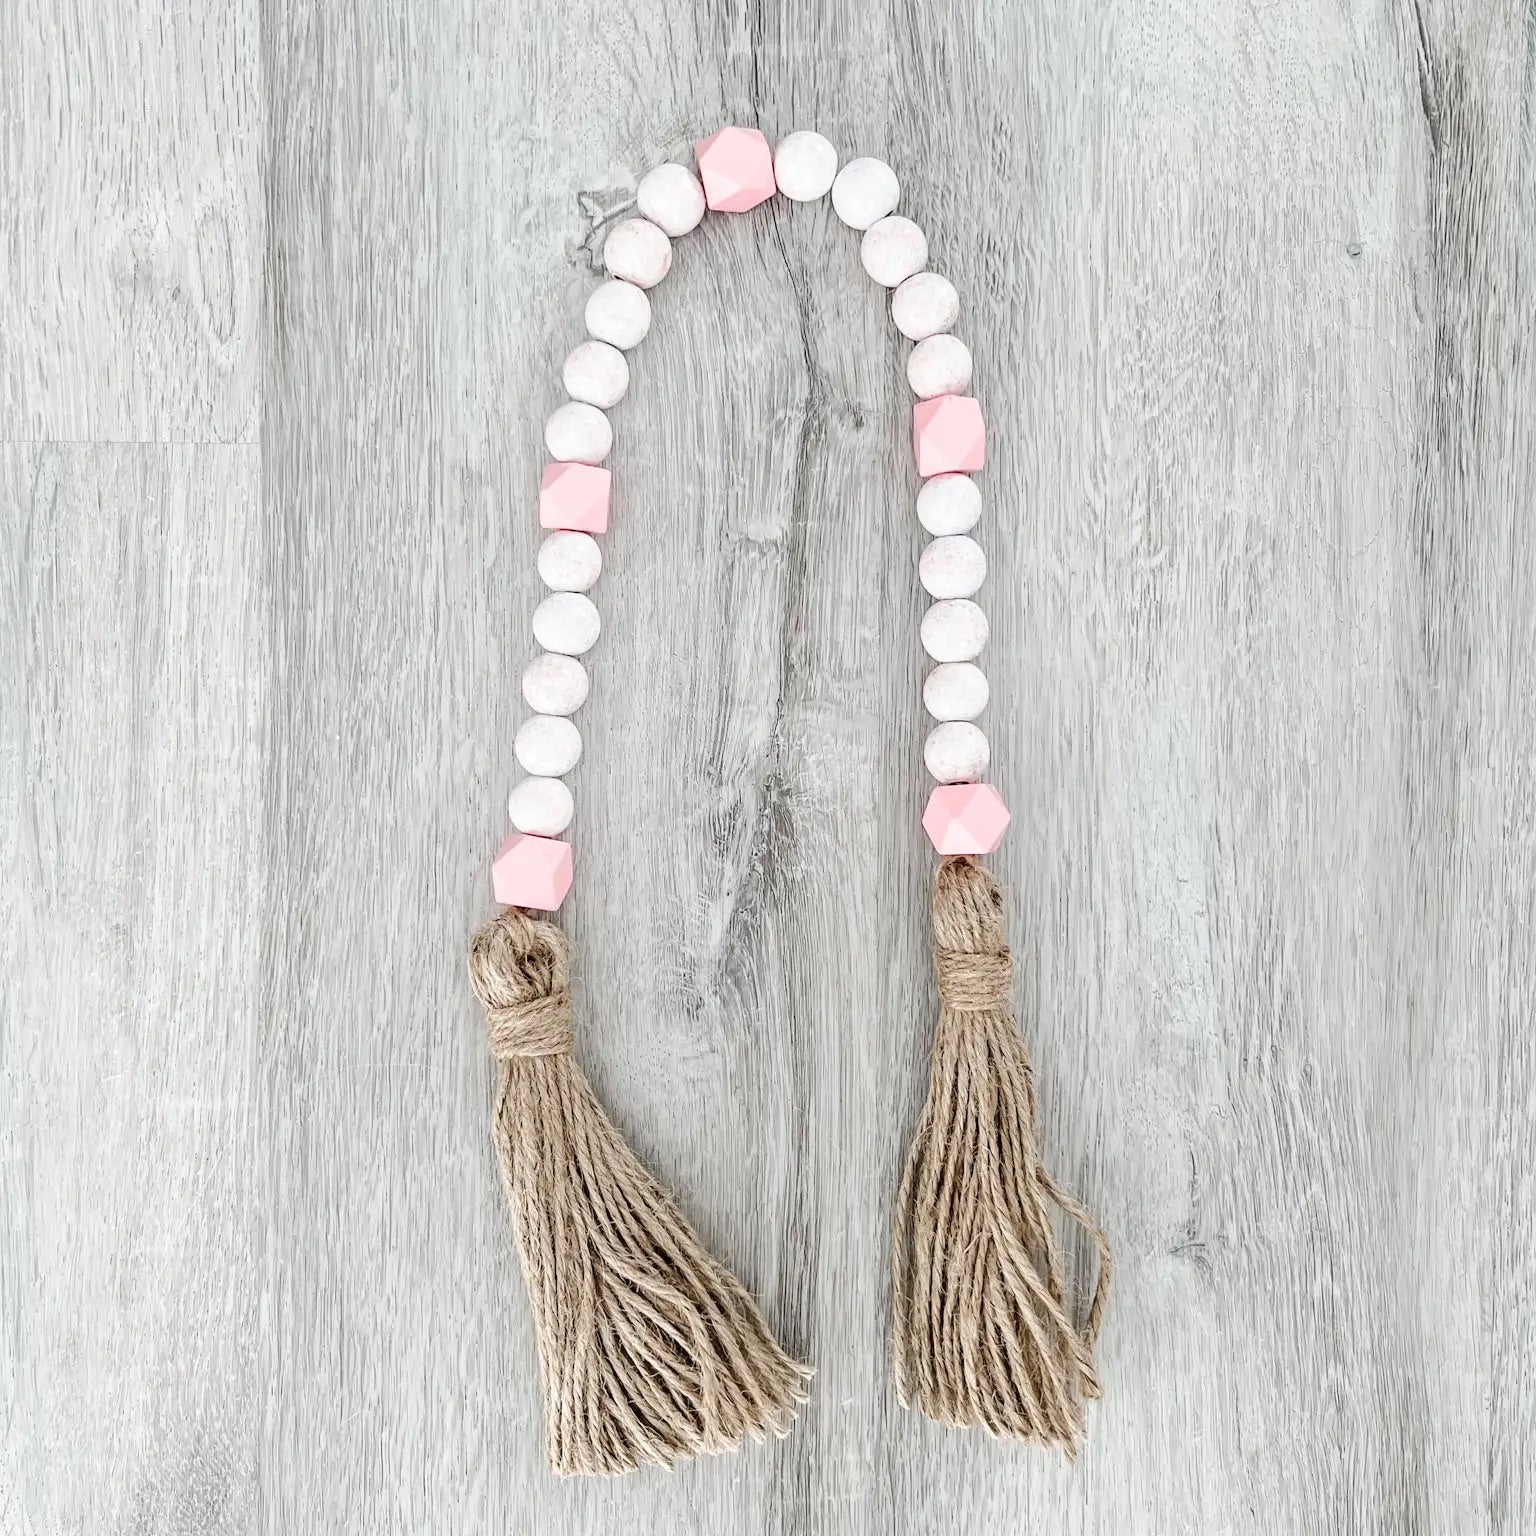 Bead Strand - Long Pink/White Distressed